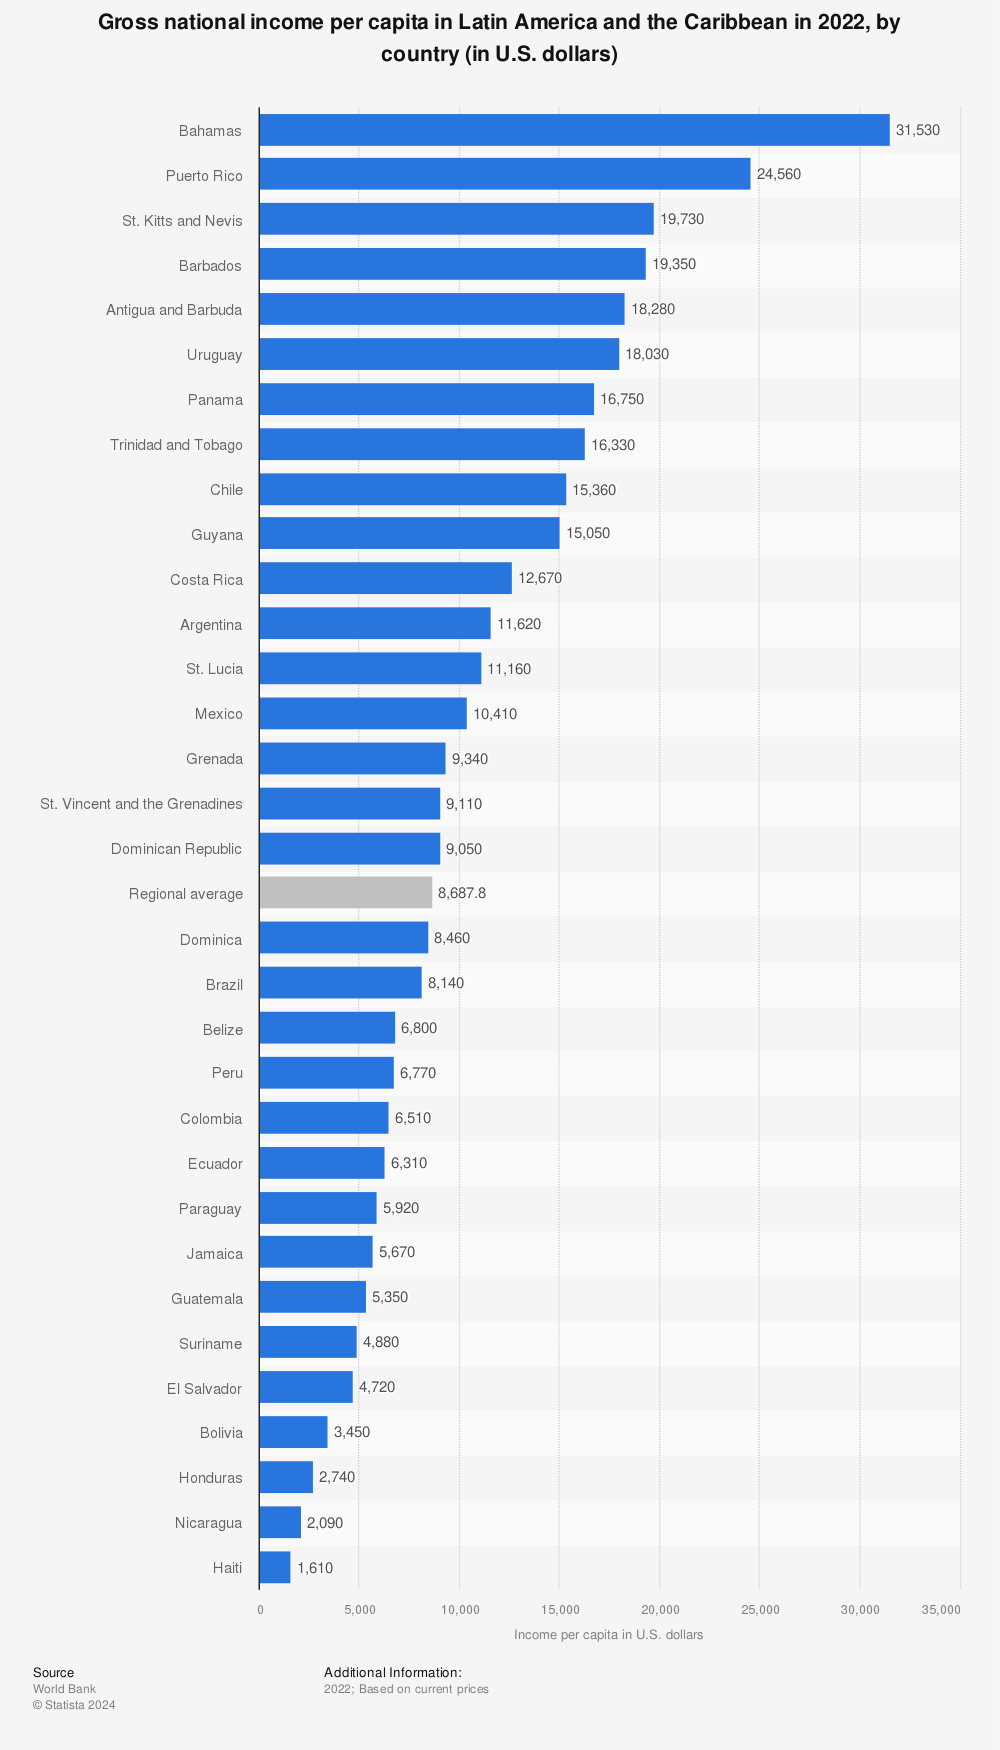 Statistic: Gross national income per capita in Latin America and the Caribbean in 2020, by country (in U.S. dollars) | Statista